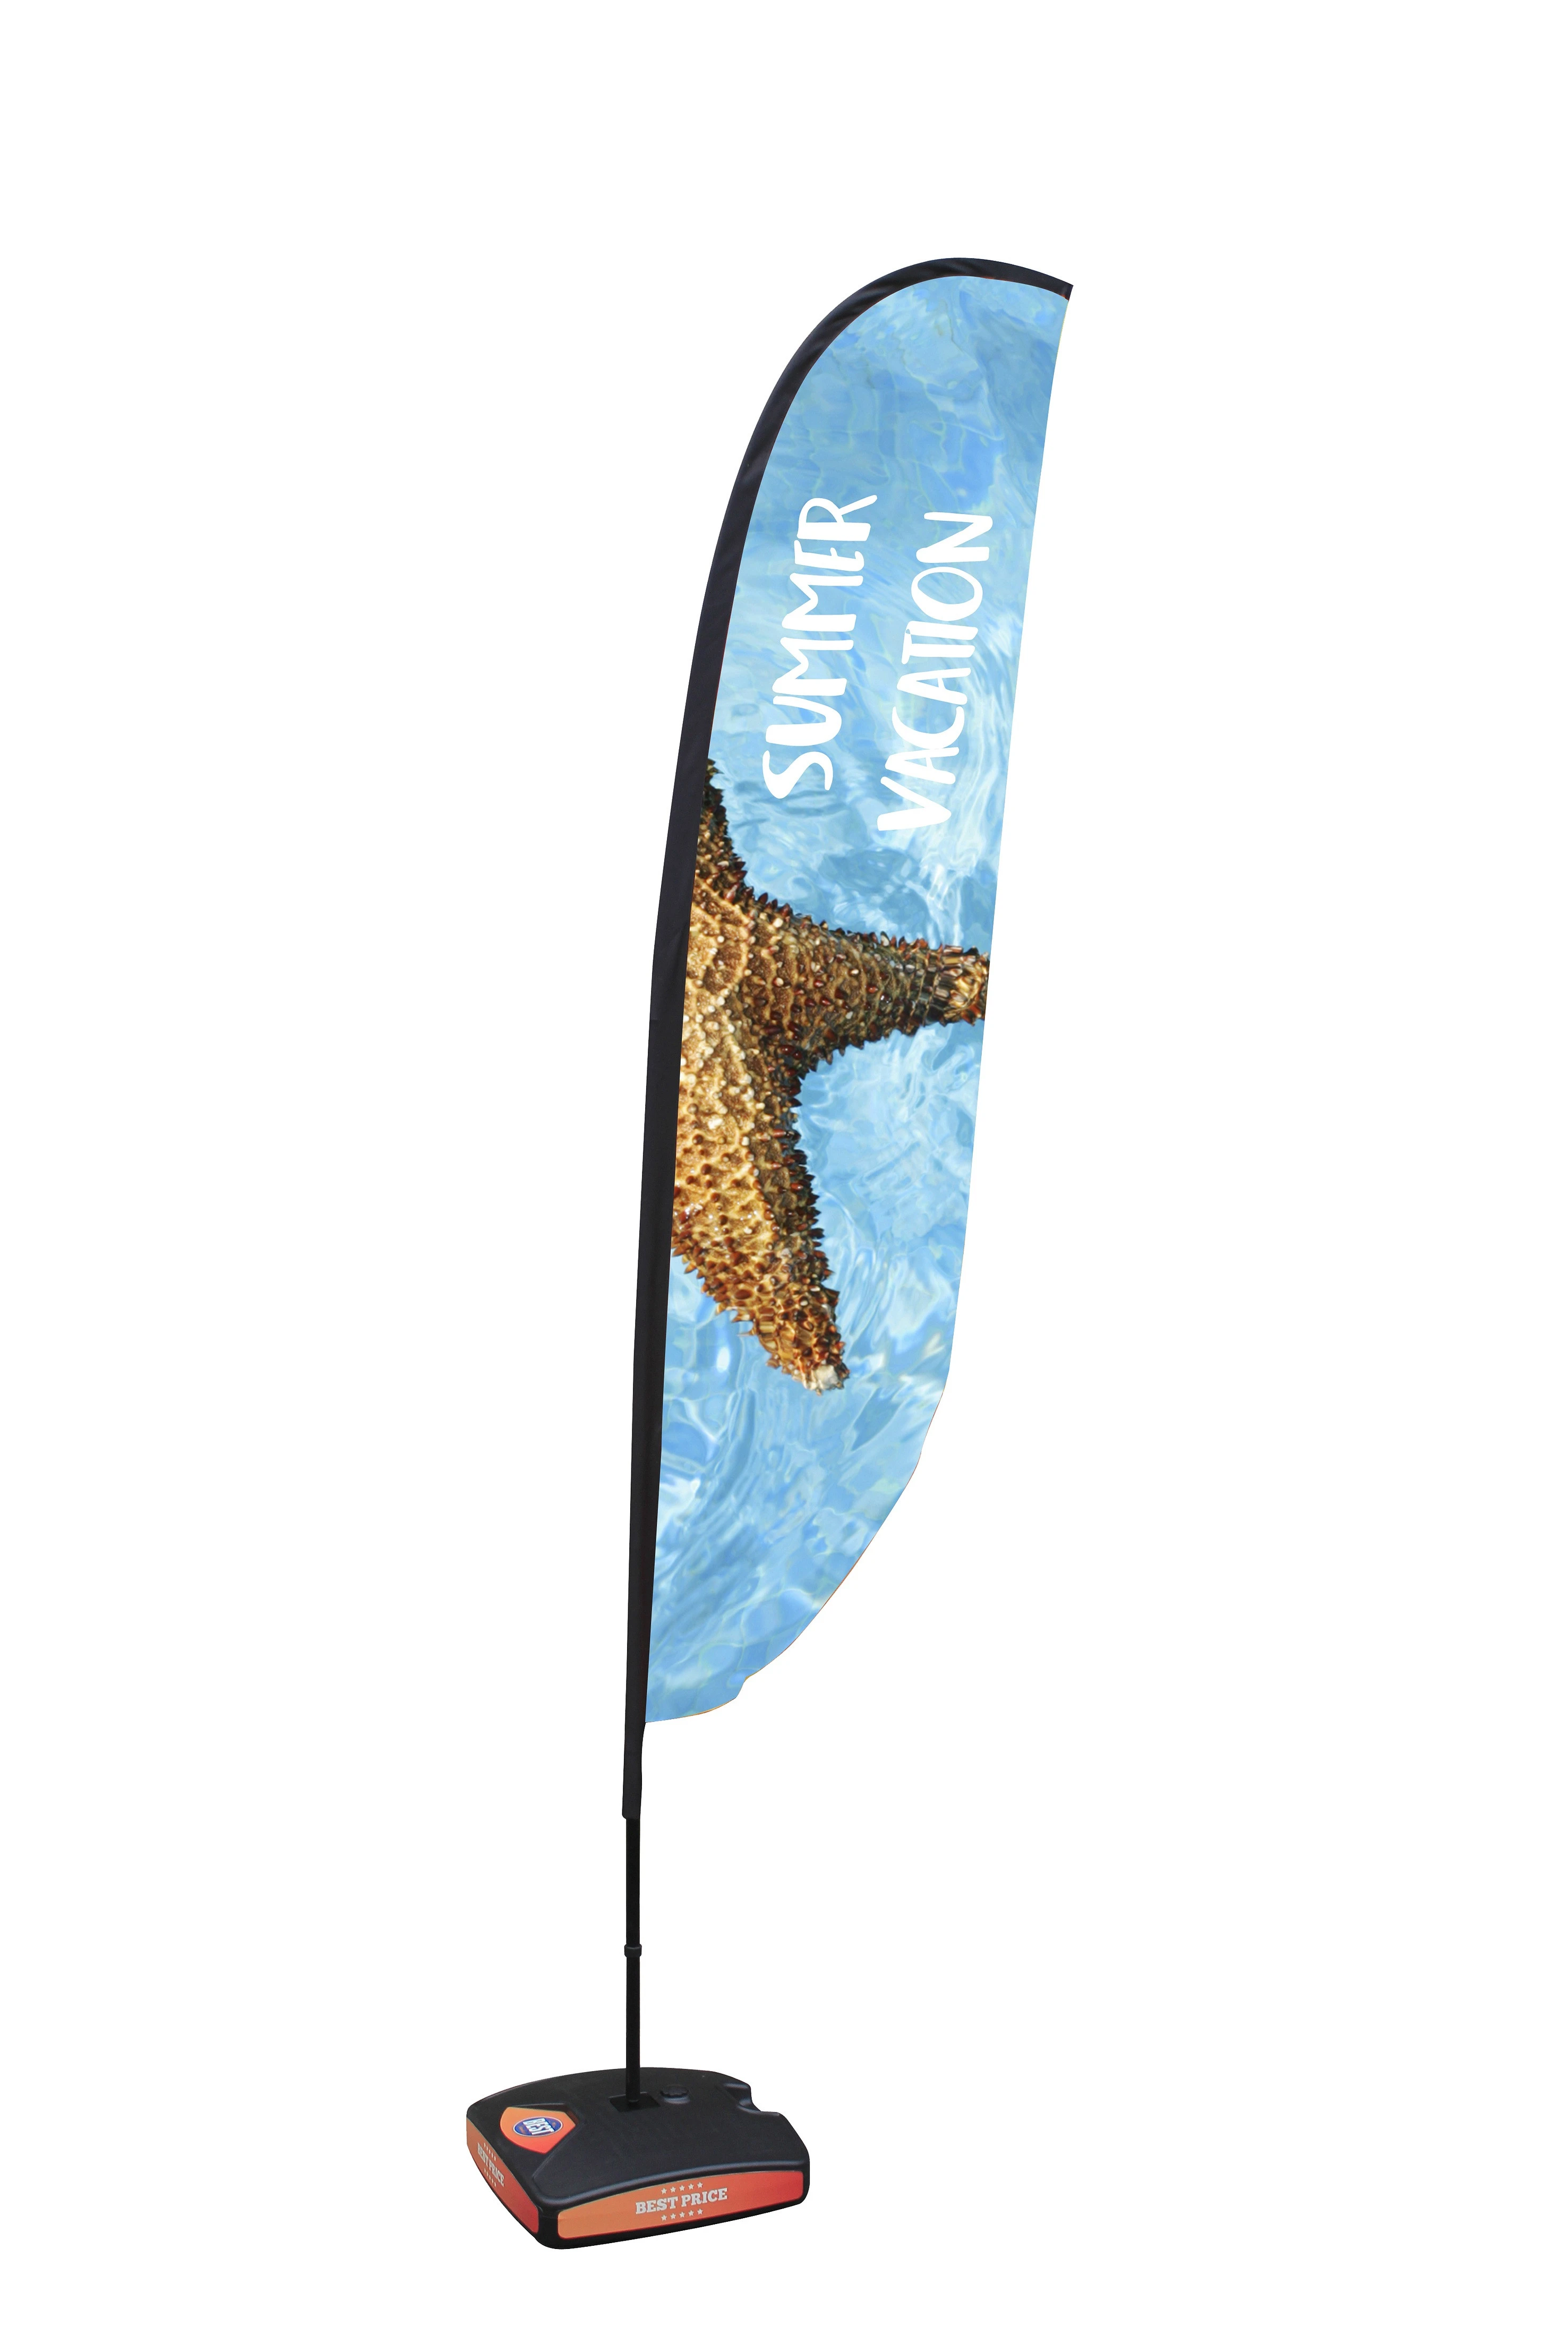 Economy outdoor  vogue flag base, Hold Banners polyester colorful print Flag banner for Events